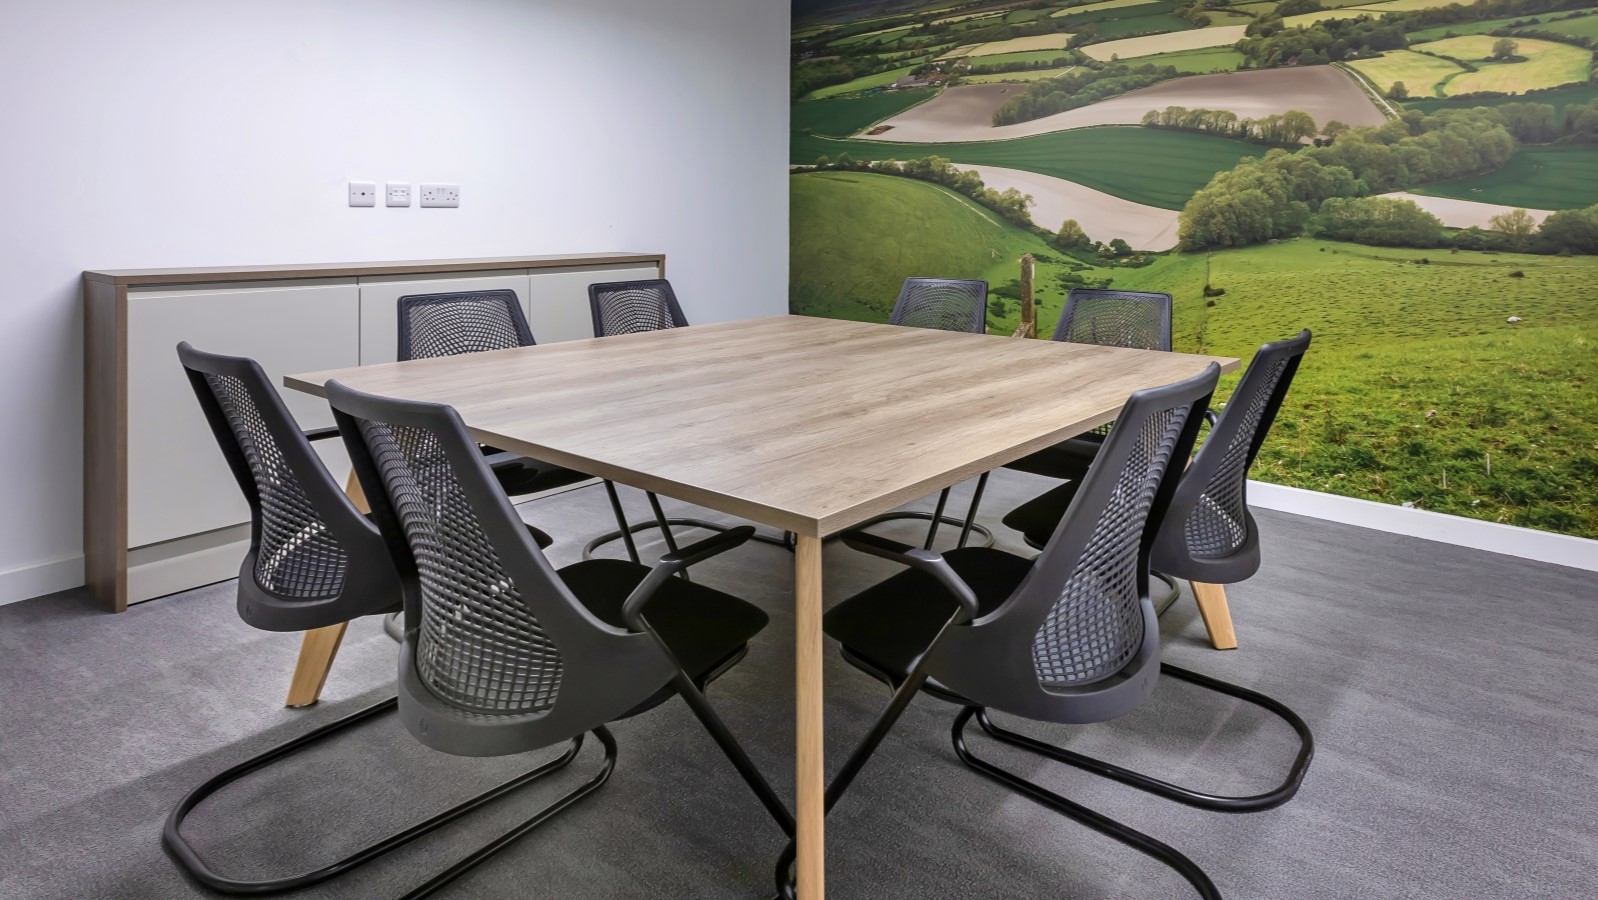 Meeting Room Furniture With Wall Graphic